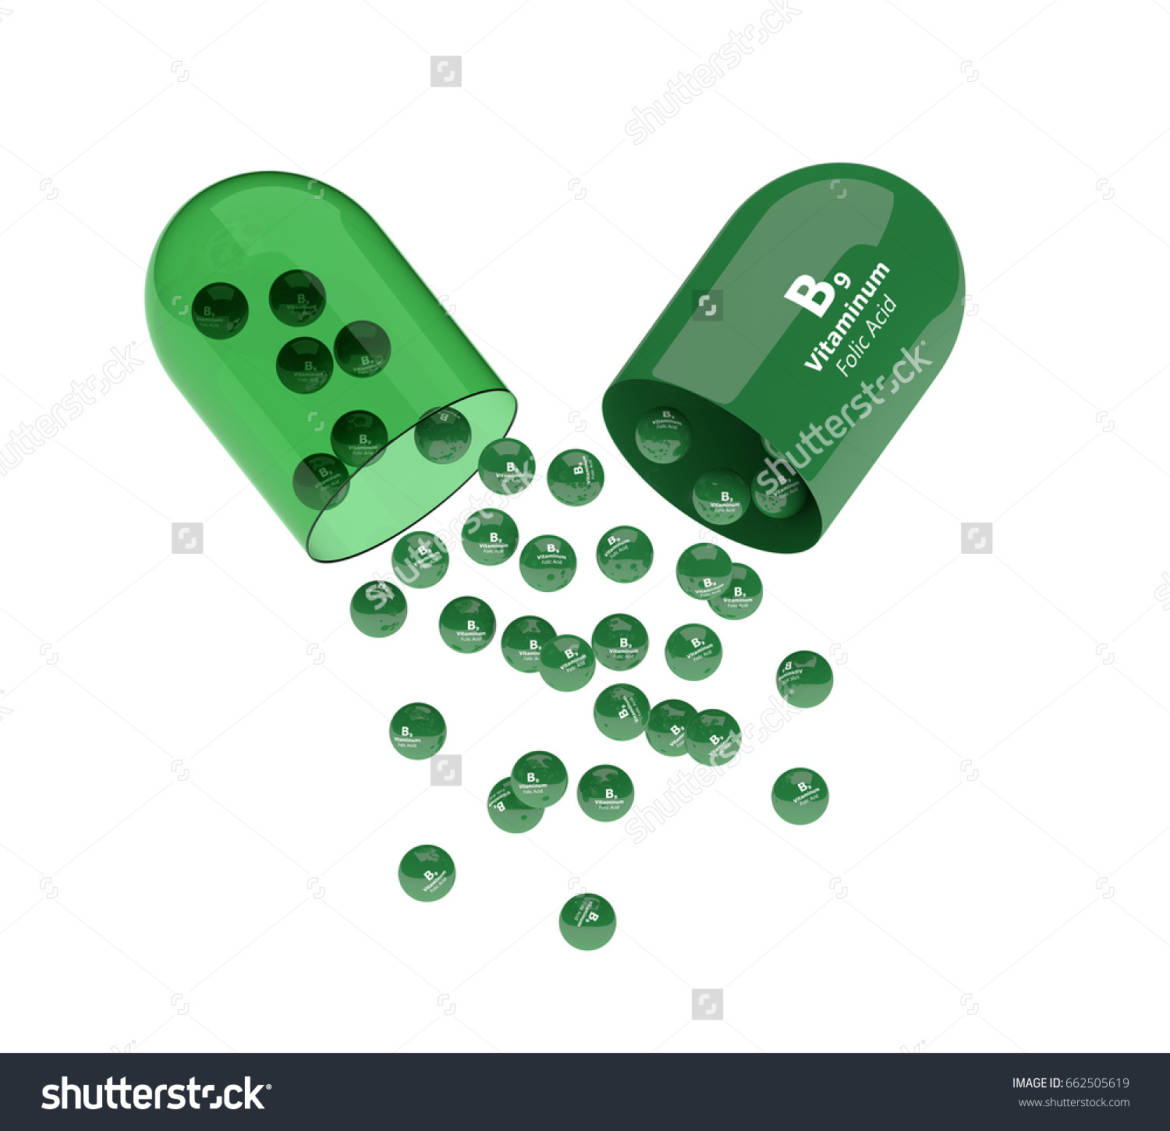 stock-photo-d-render-of-b-folic-acid-pill-with-granules-isolated-over-white-background-662505619.jpg